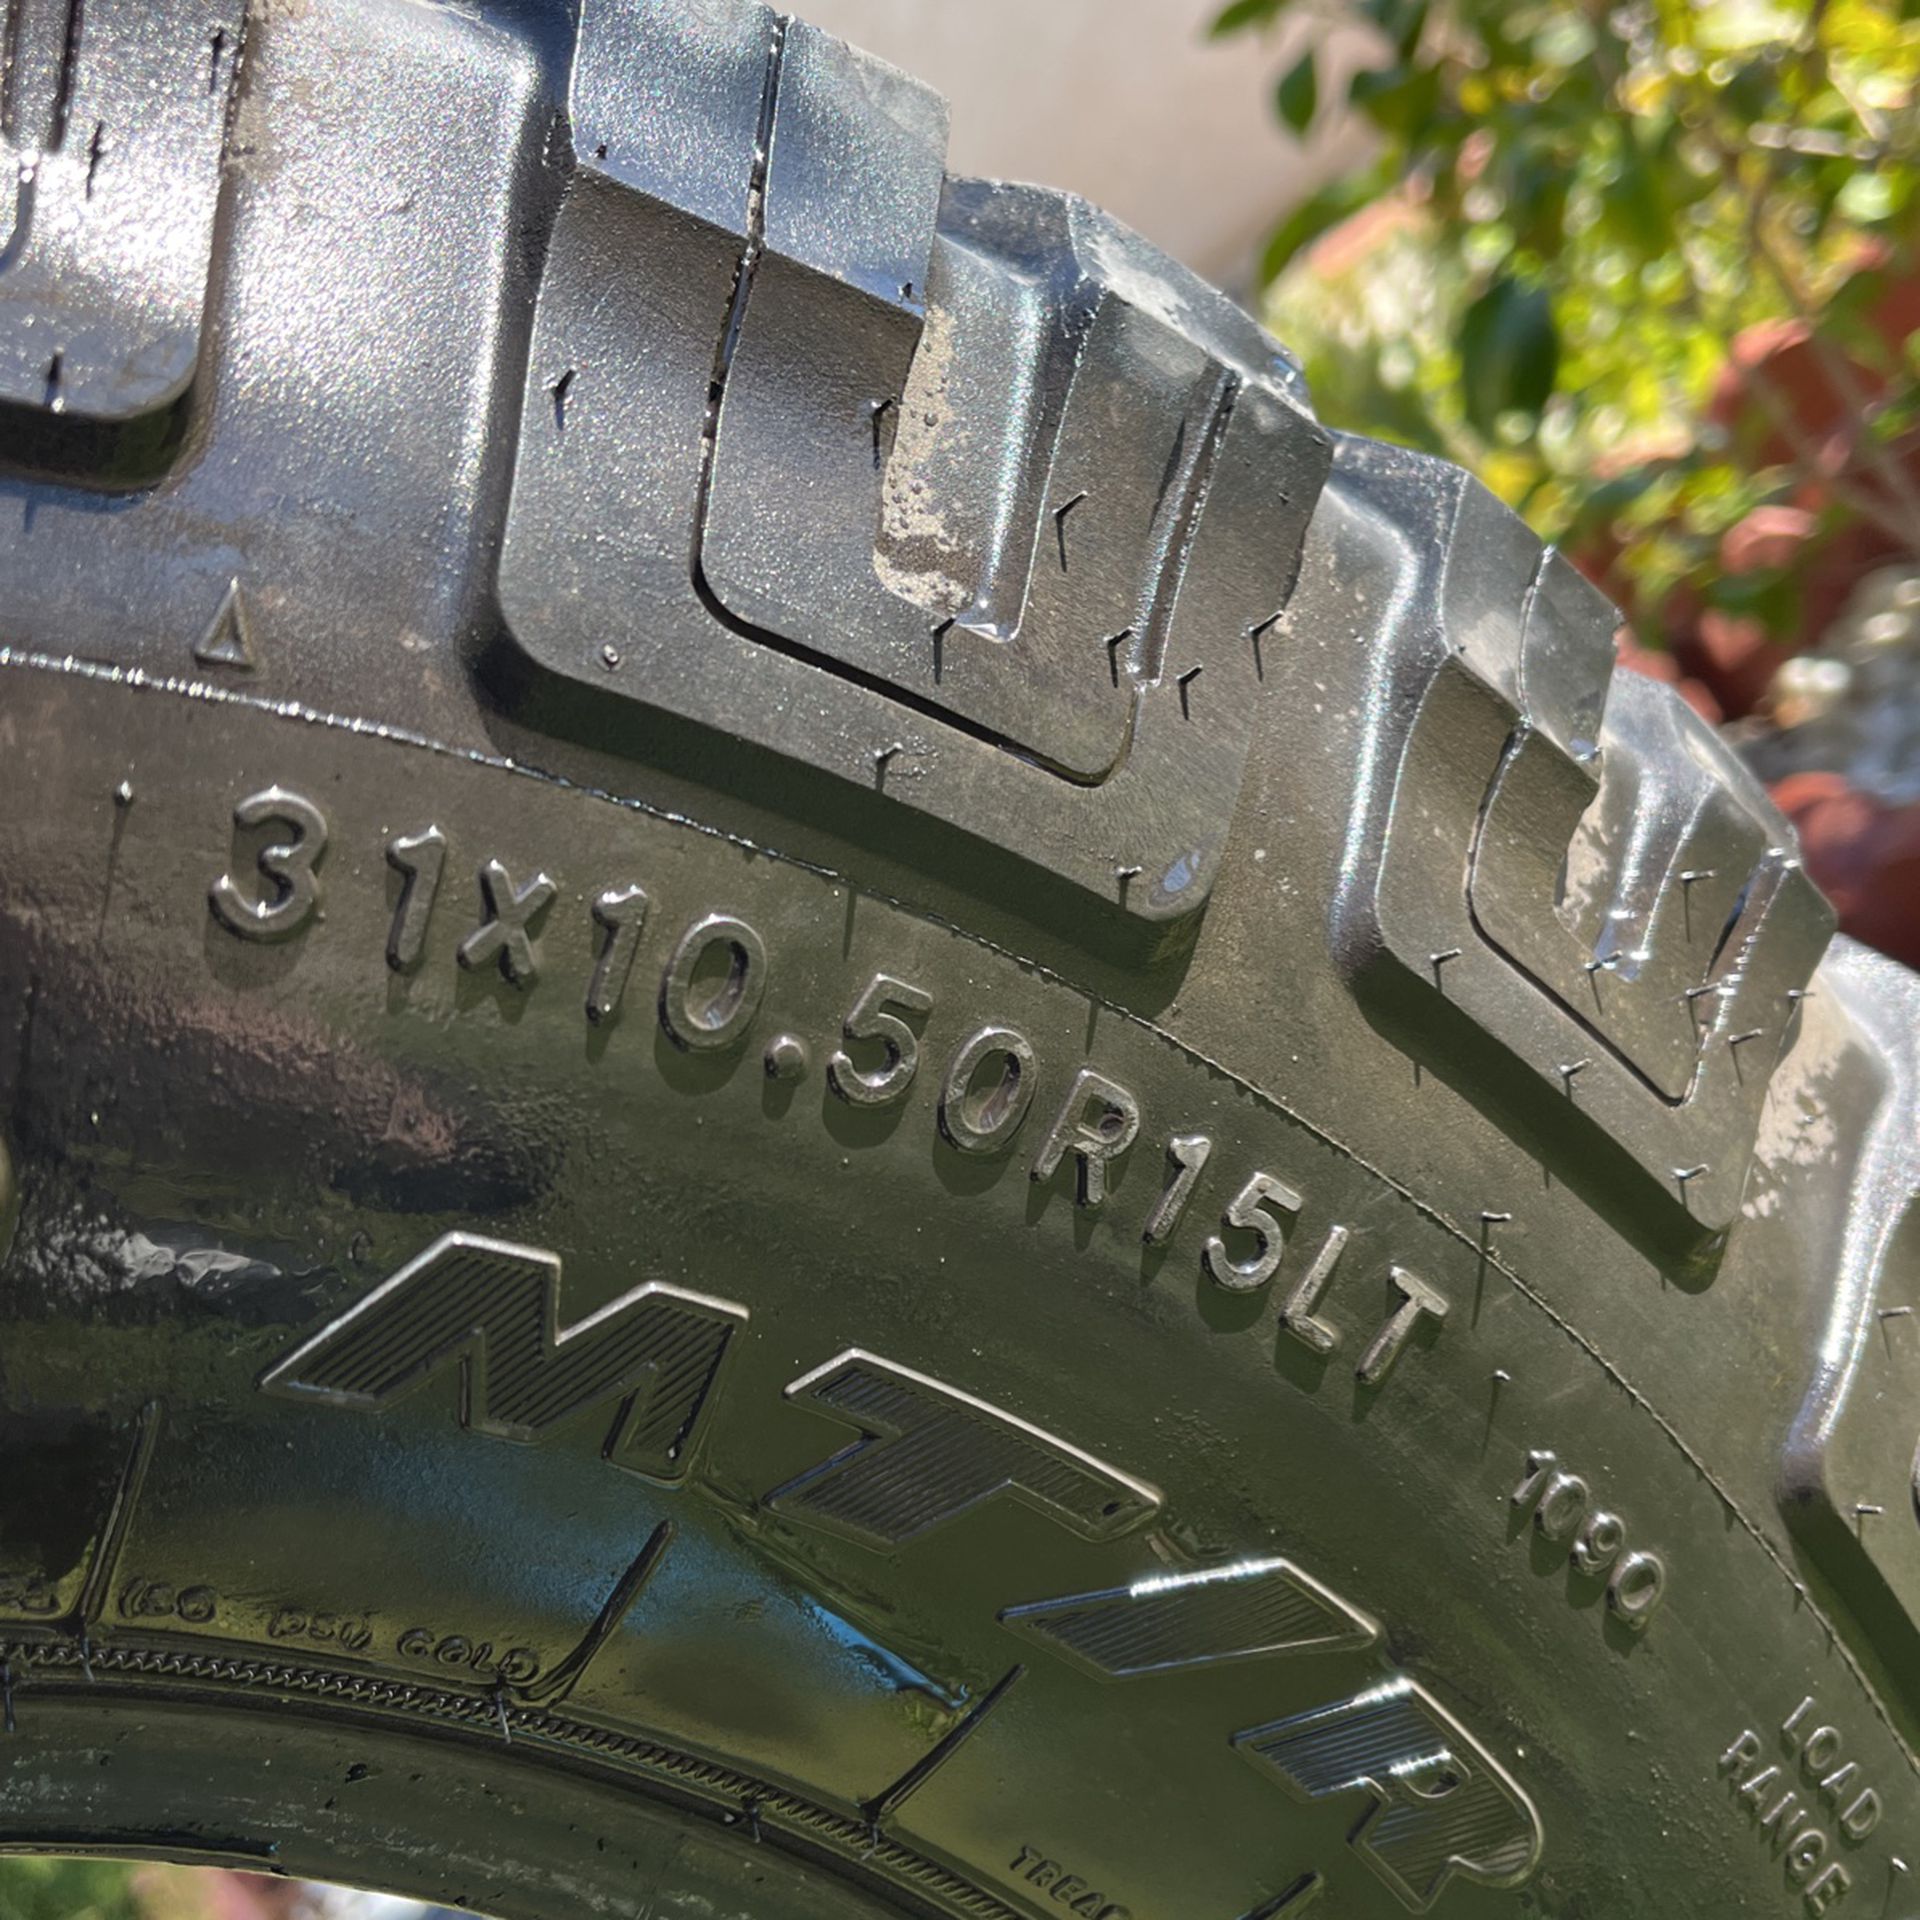 31 X  15 LT Goodyear Wrangler Tires for Sale in Fontana, CA - OfferUp